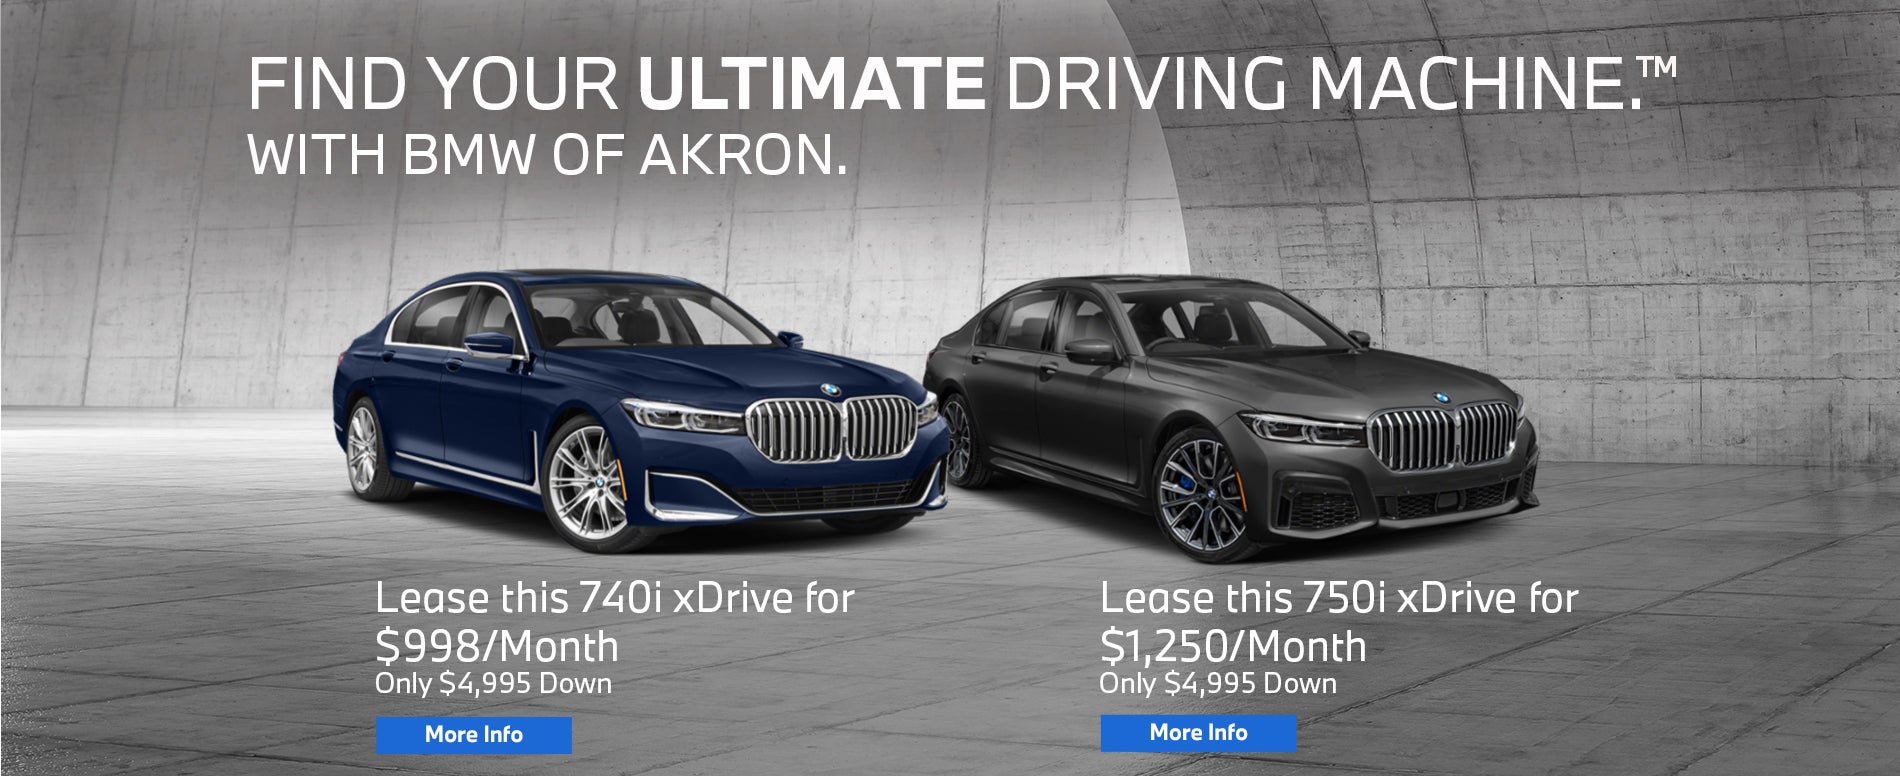 Find Your Ultimate Driving Machine at BMW of Akron, 7 Series